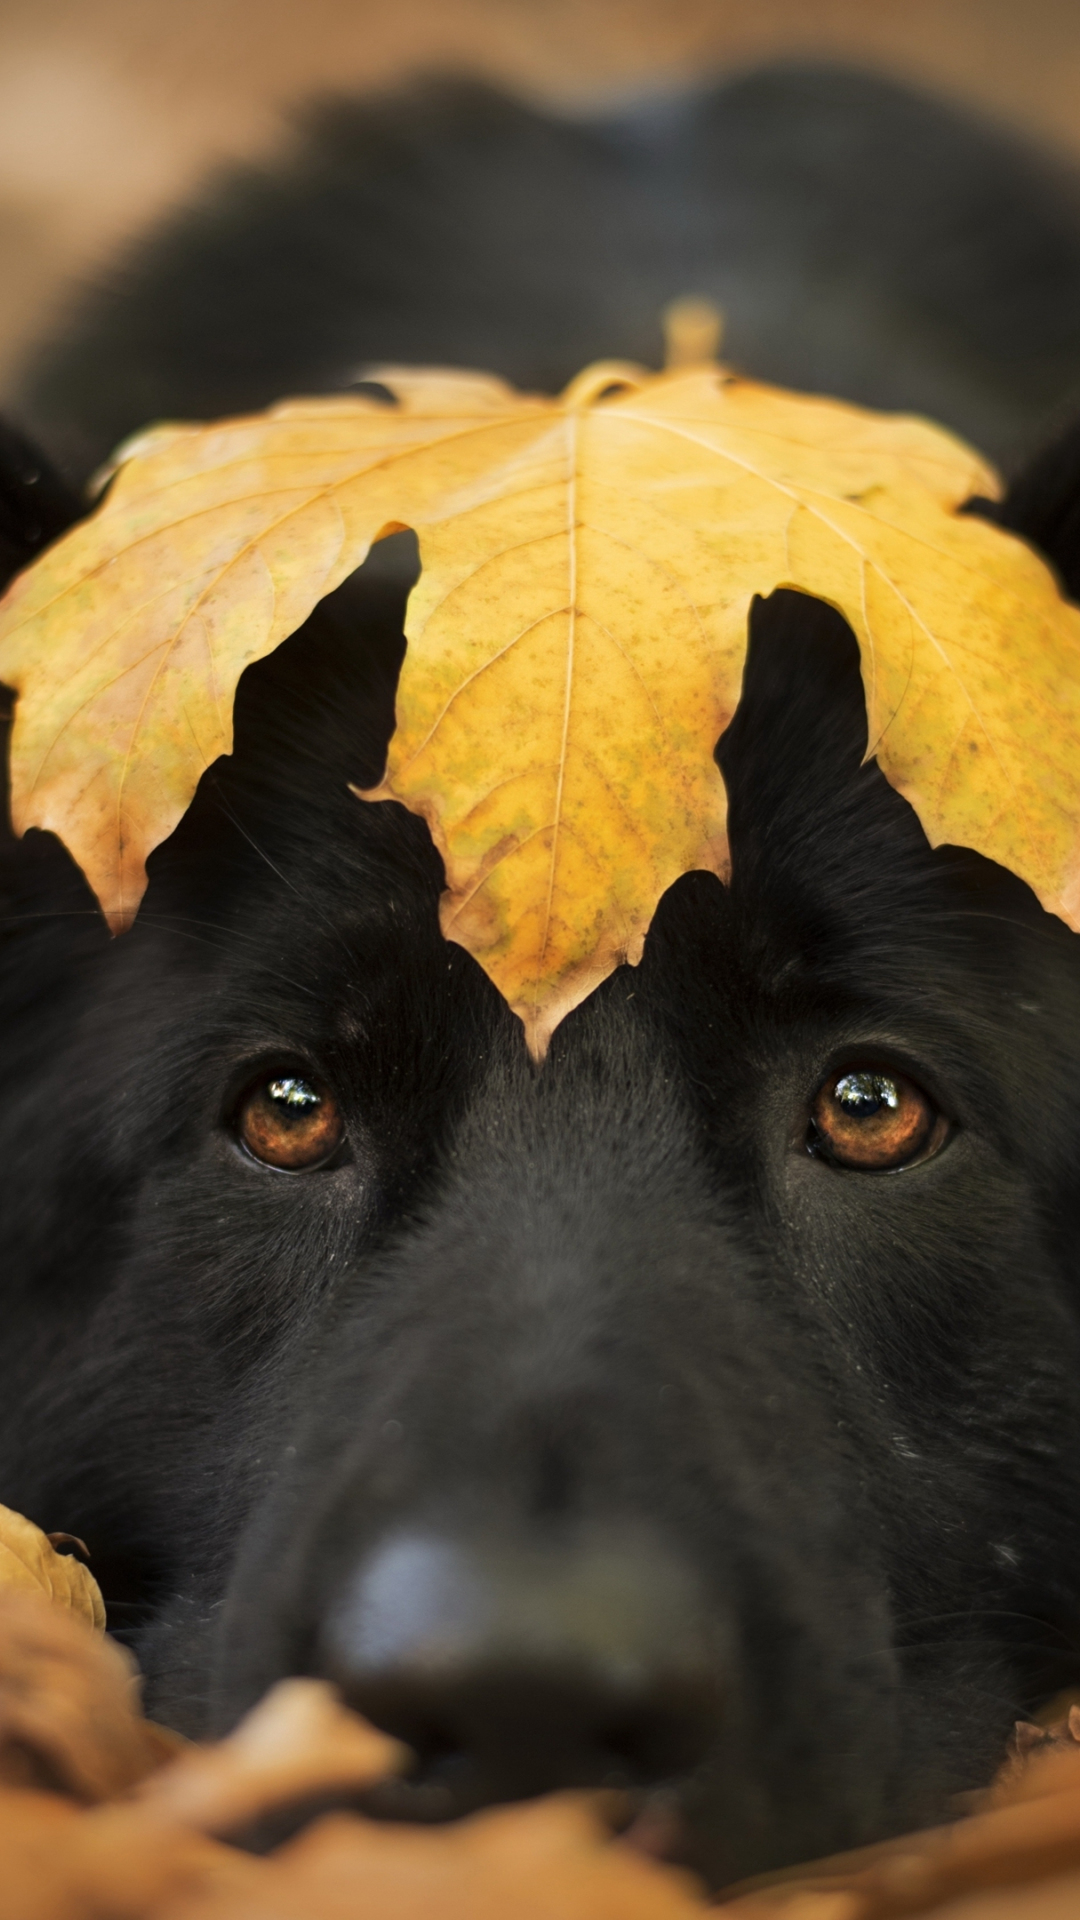 Dog and autumn, cute stare, close up, 1080x1920 wallpaper